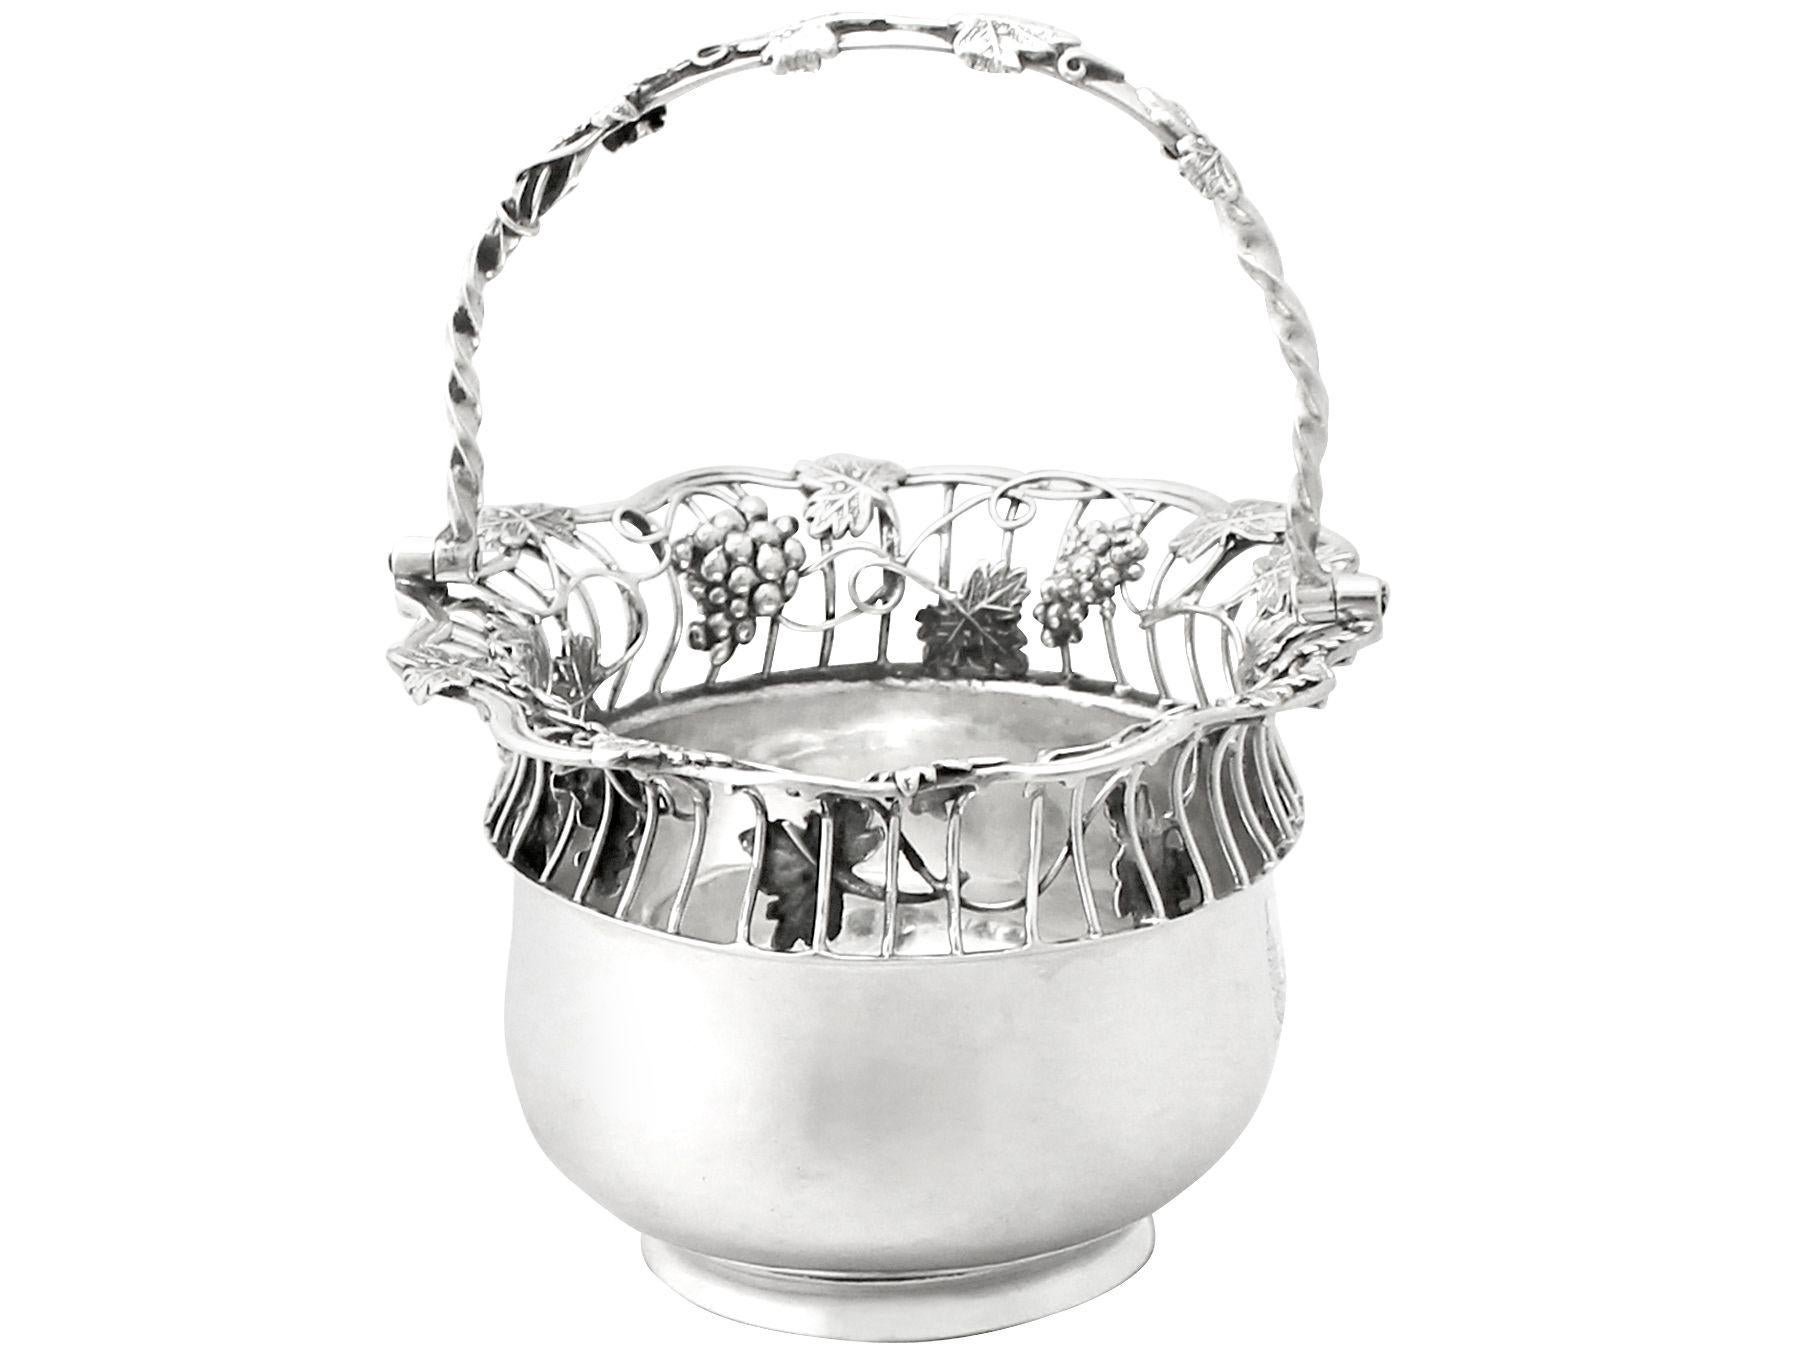 English Antique George III Sterling Silver Sweetmeat Basket